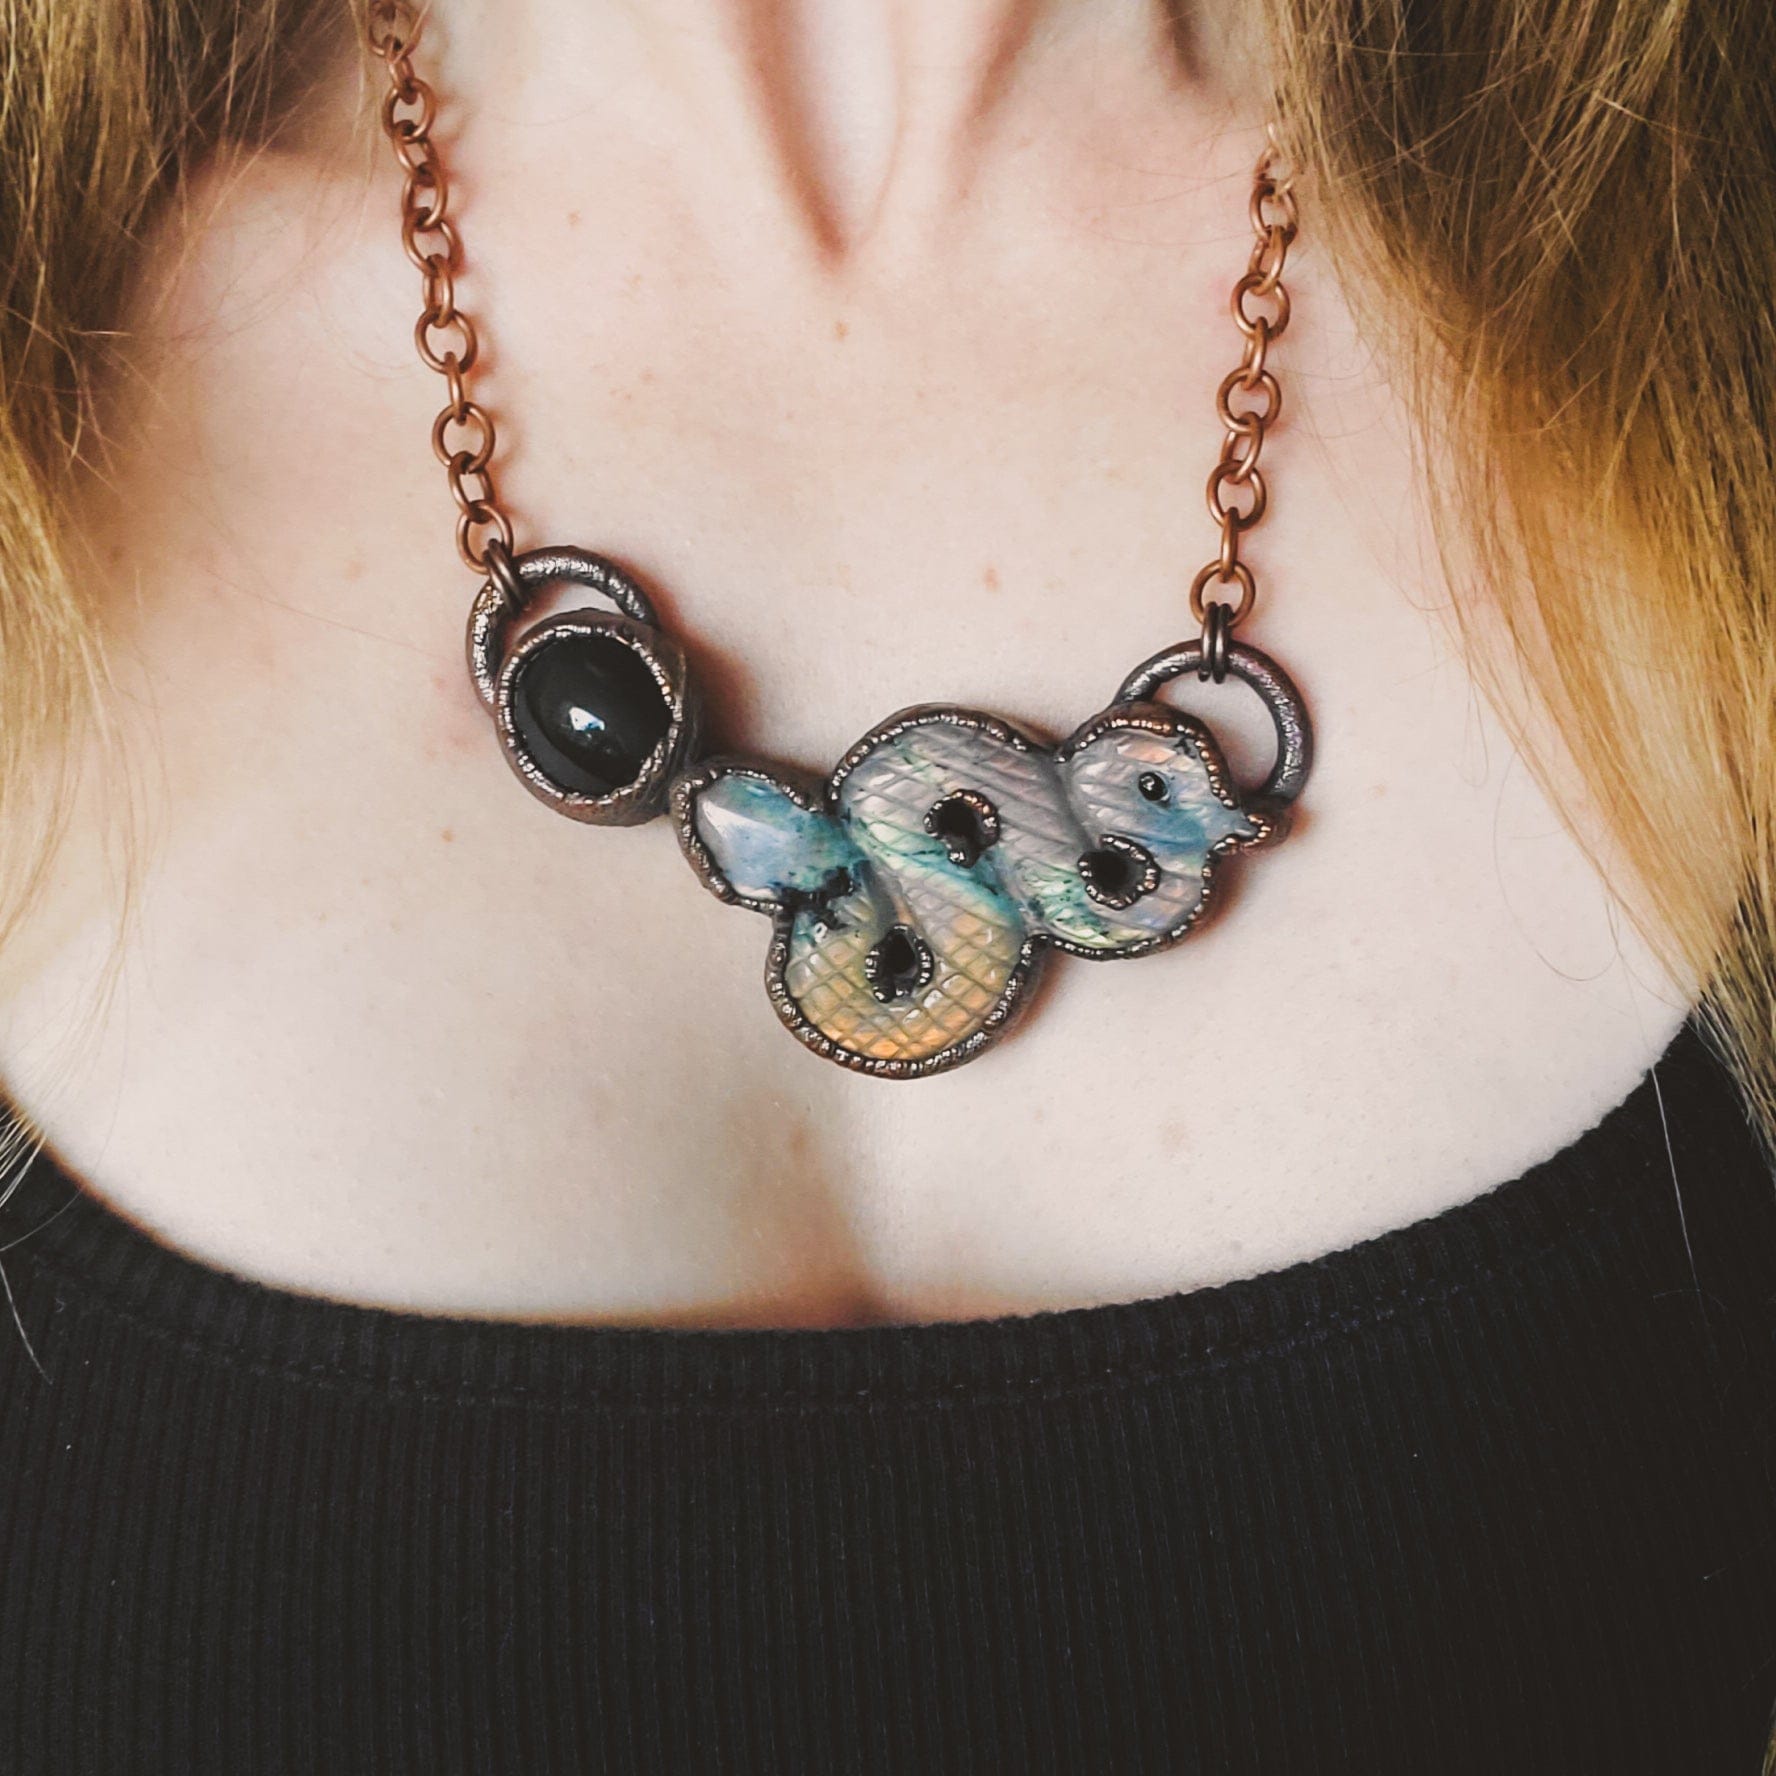 Auryn Necklace From the Neverending Story - Etsy